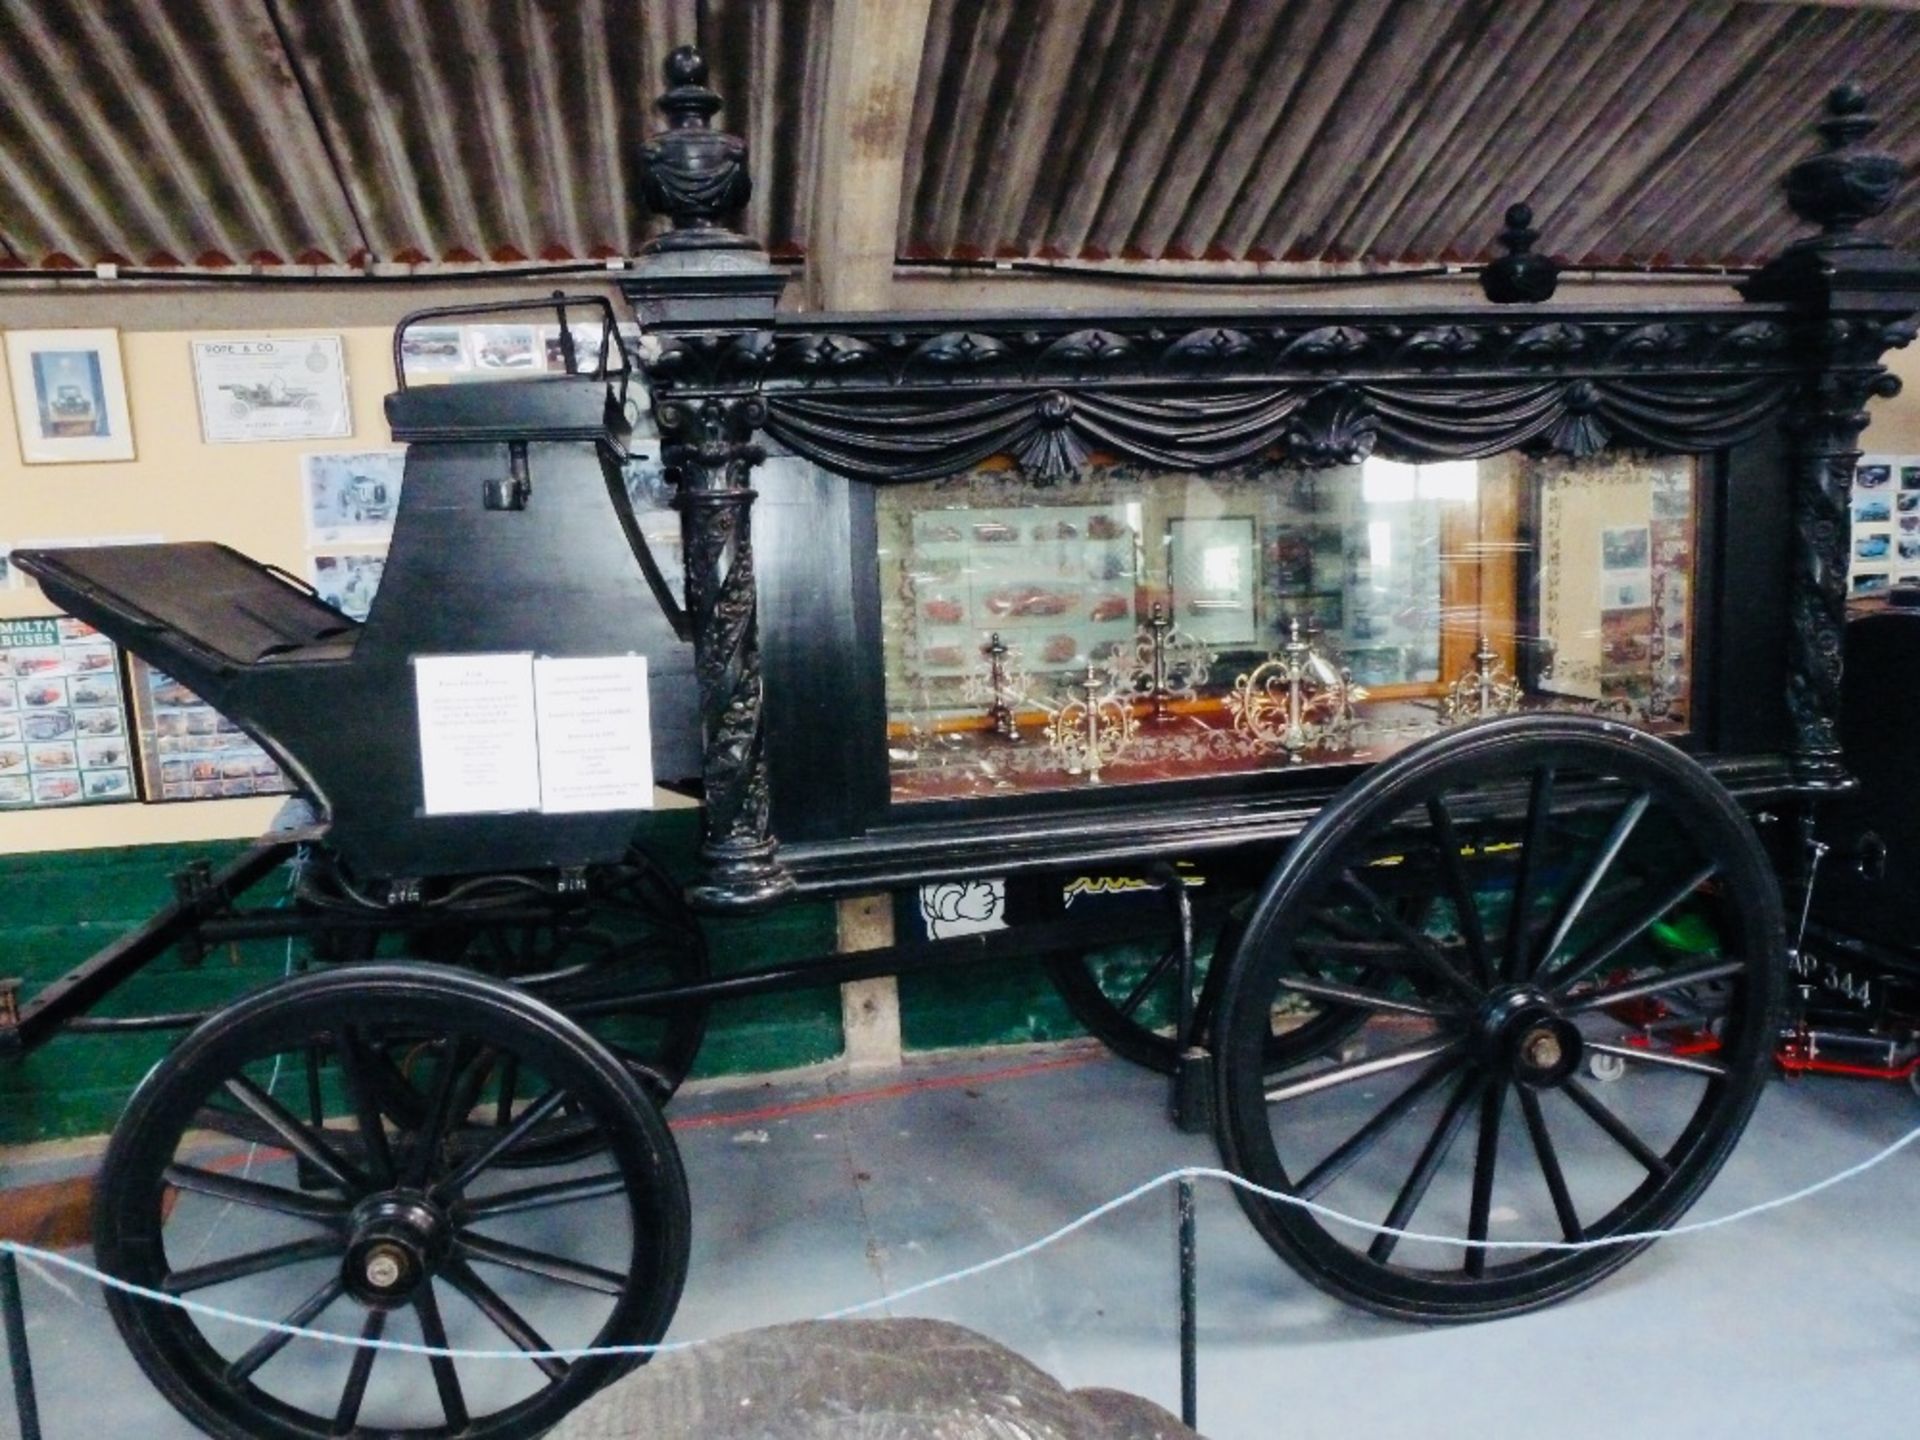 IRISH COOKSTOWN FLORAL HEARSE built by Cookstown of Ireland, circa 1850. Painted black with